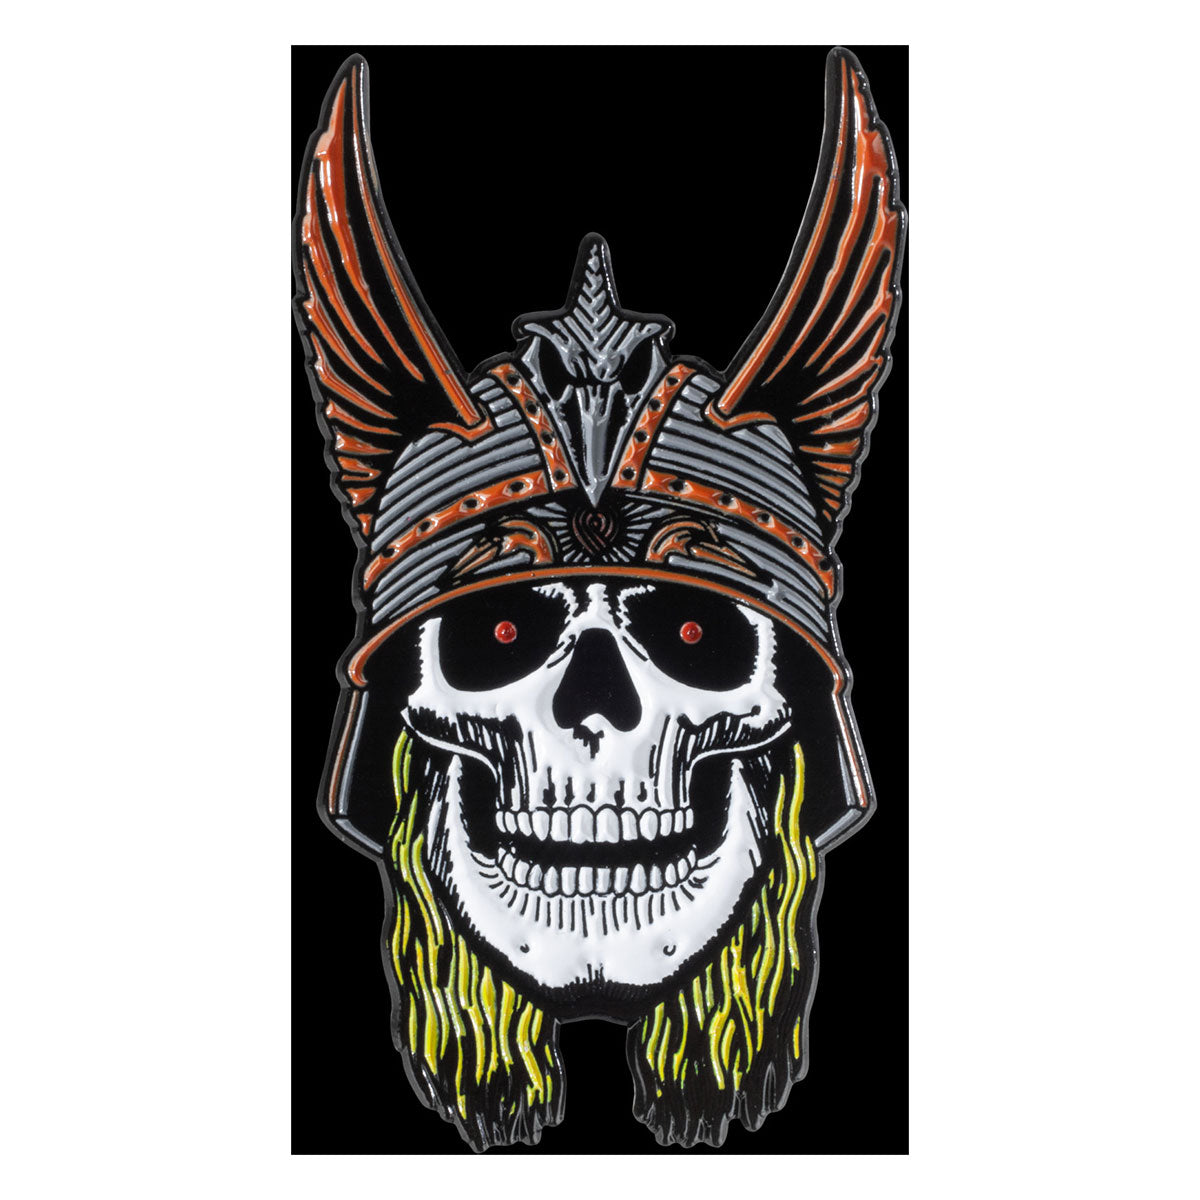 Powell Peralta Lapel Andy Anderson Pin image 1